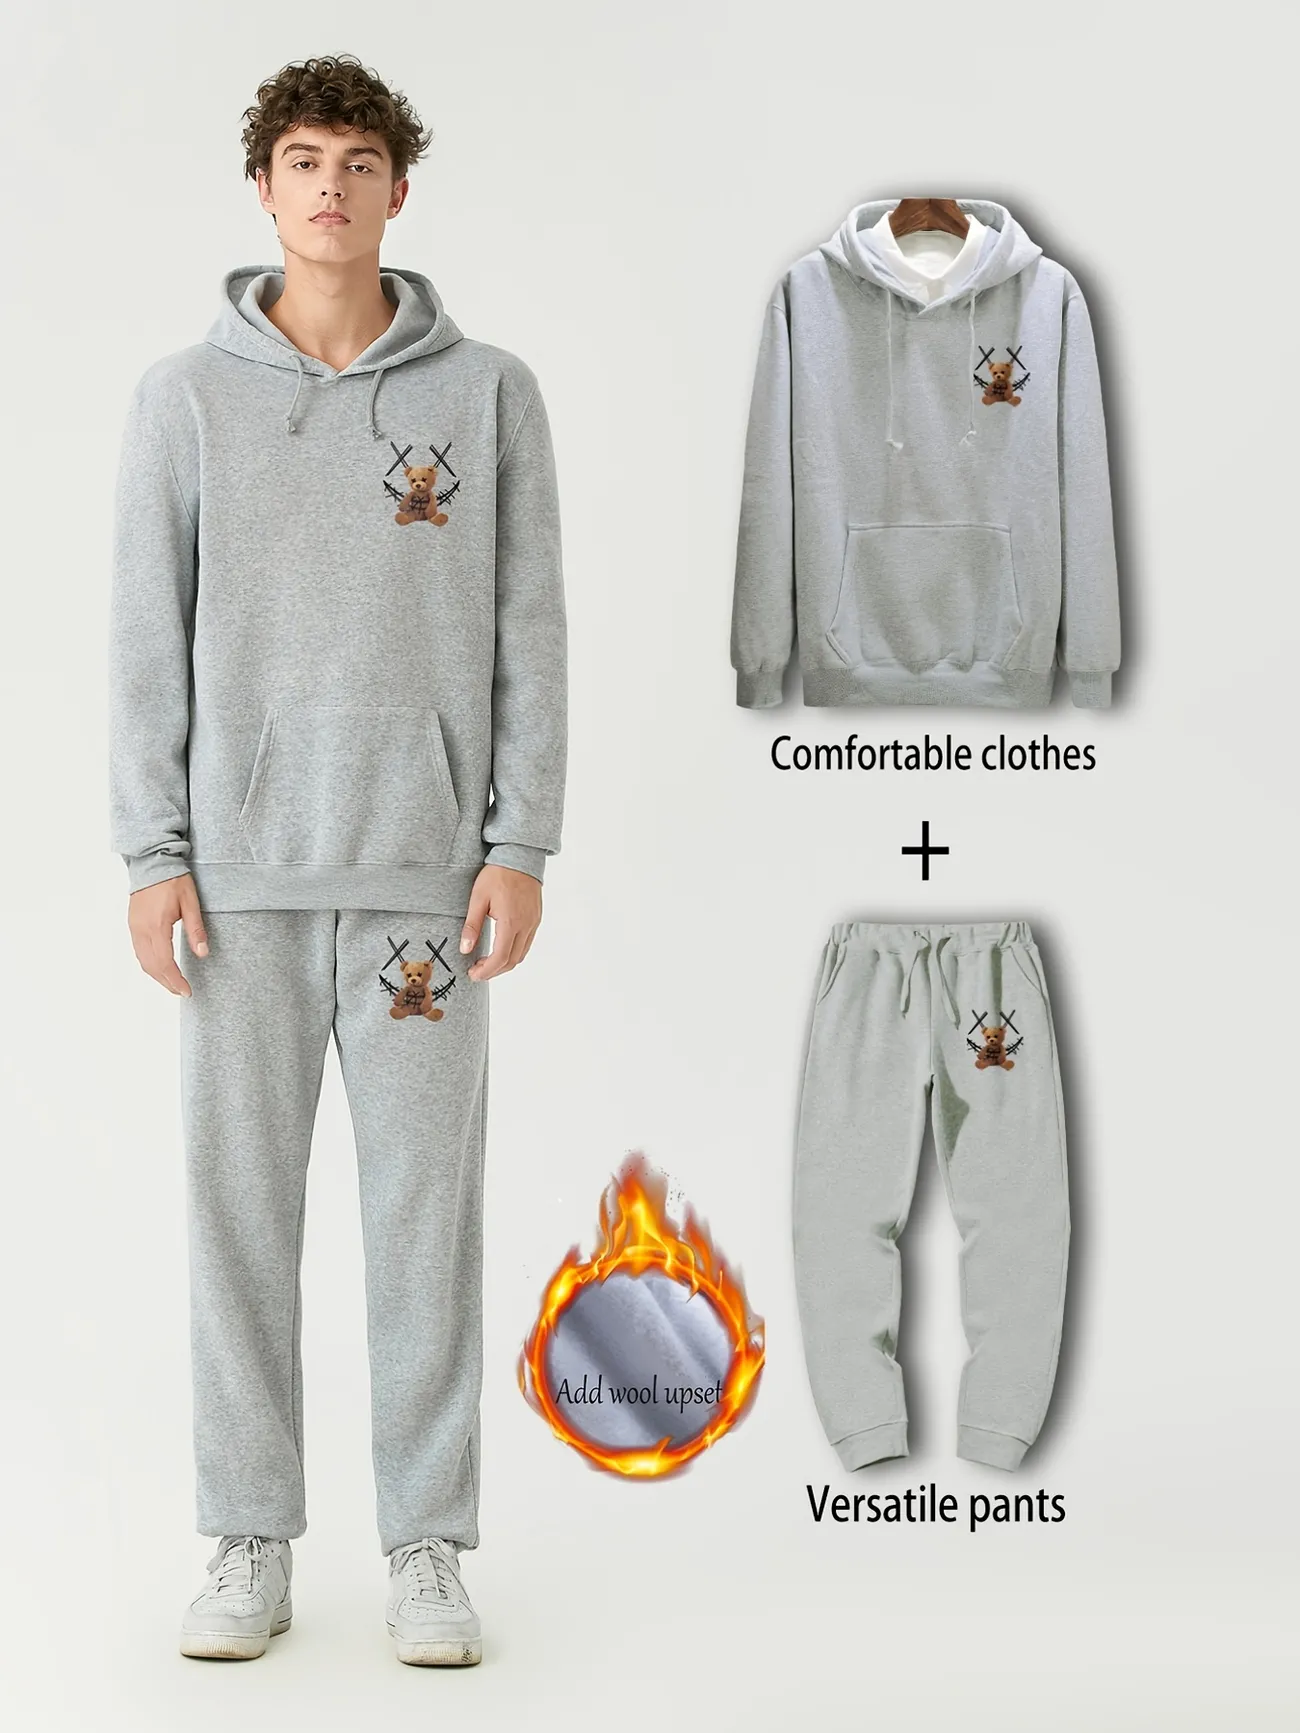 2pcs Mens Casual Warm Sweatsuits Graphic Print Hoodie With Kangaroo Pocket  Drawstring Sweatpants, Shop The Latest Trends